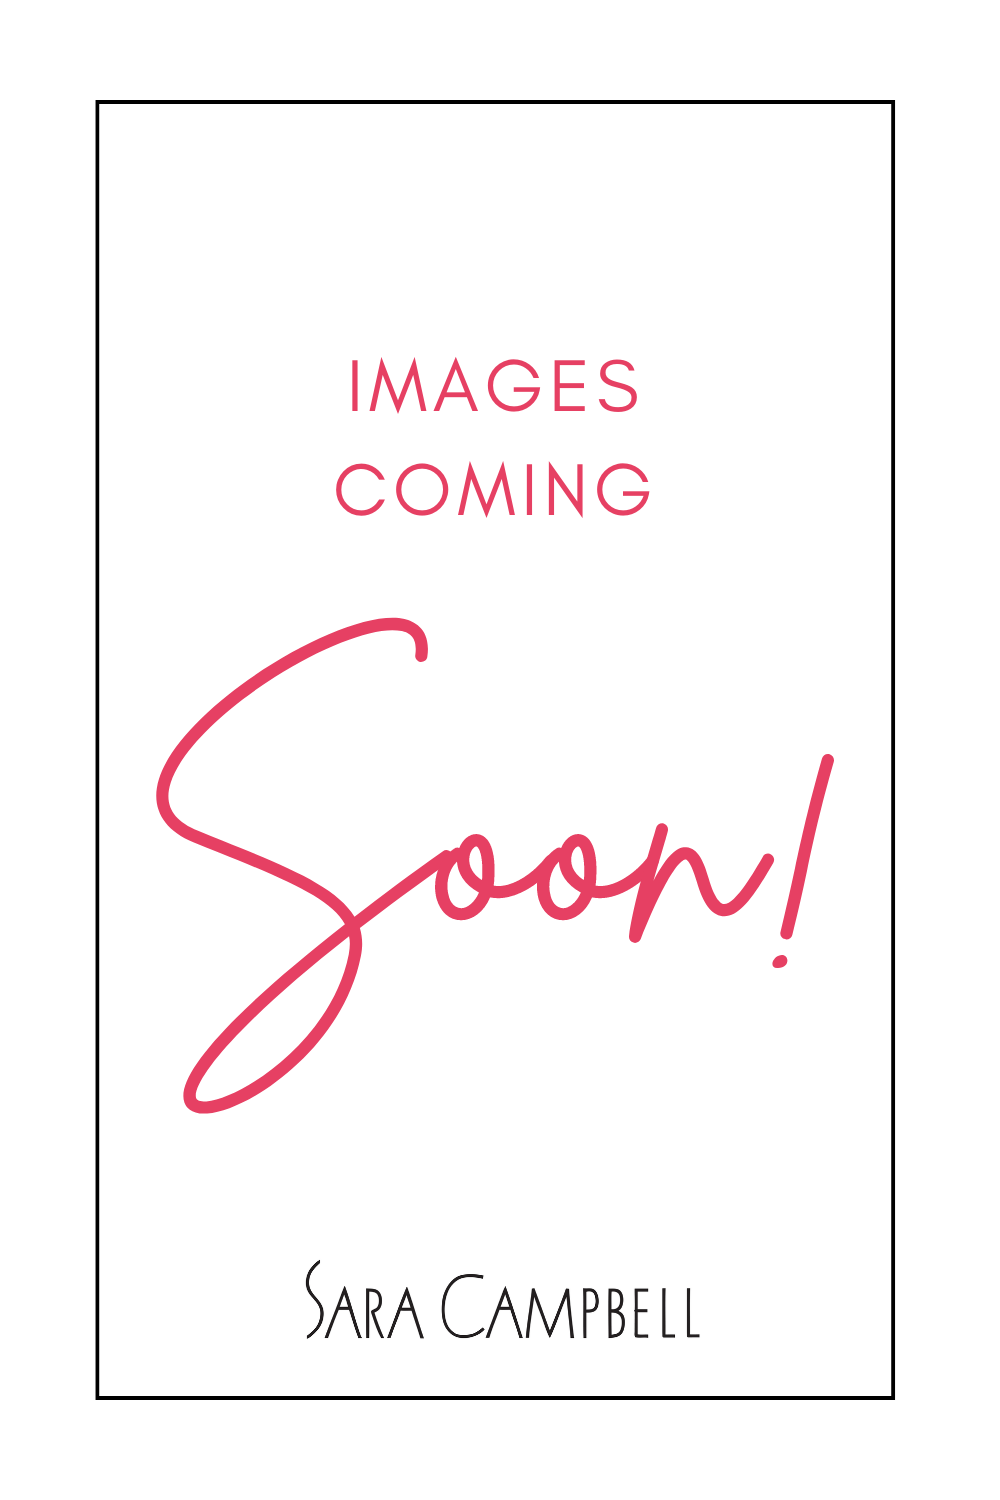 "Images Coming Soon" graphic